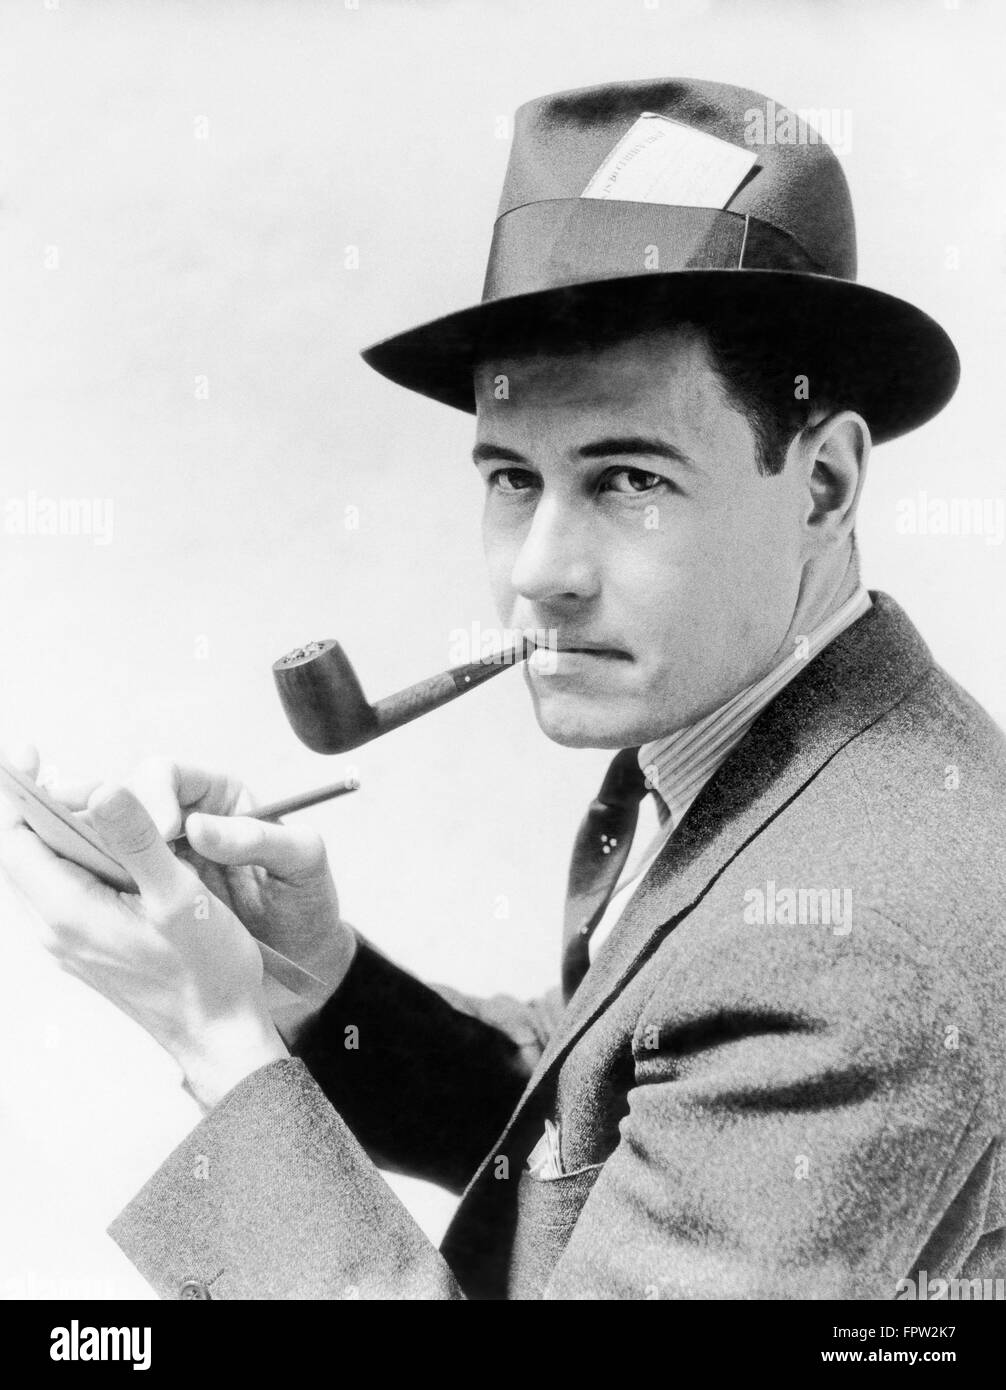 1930s 1940s MAN REPORTER WEARING HAT WITH PRESS PASS WRITING NOTES IN PAD TABLET SMOKING PIPE LOOKING AT CAMERA Stock Photo